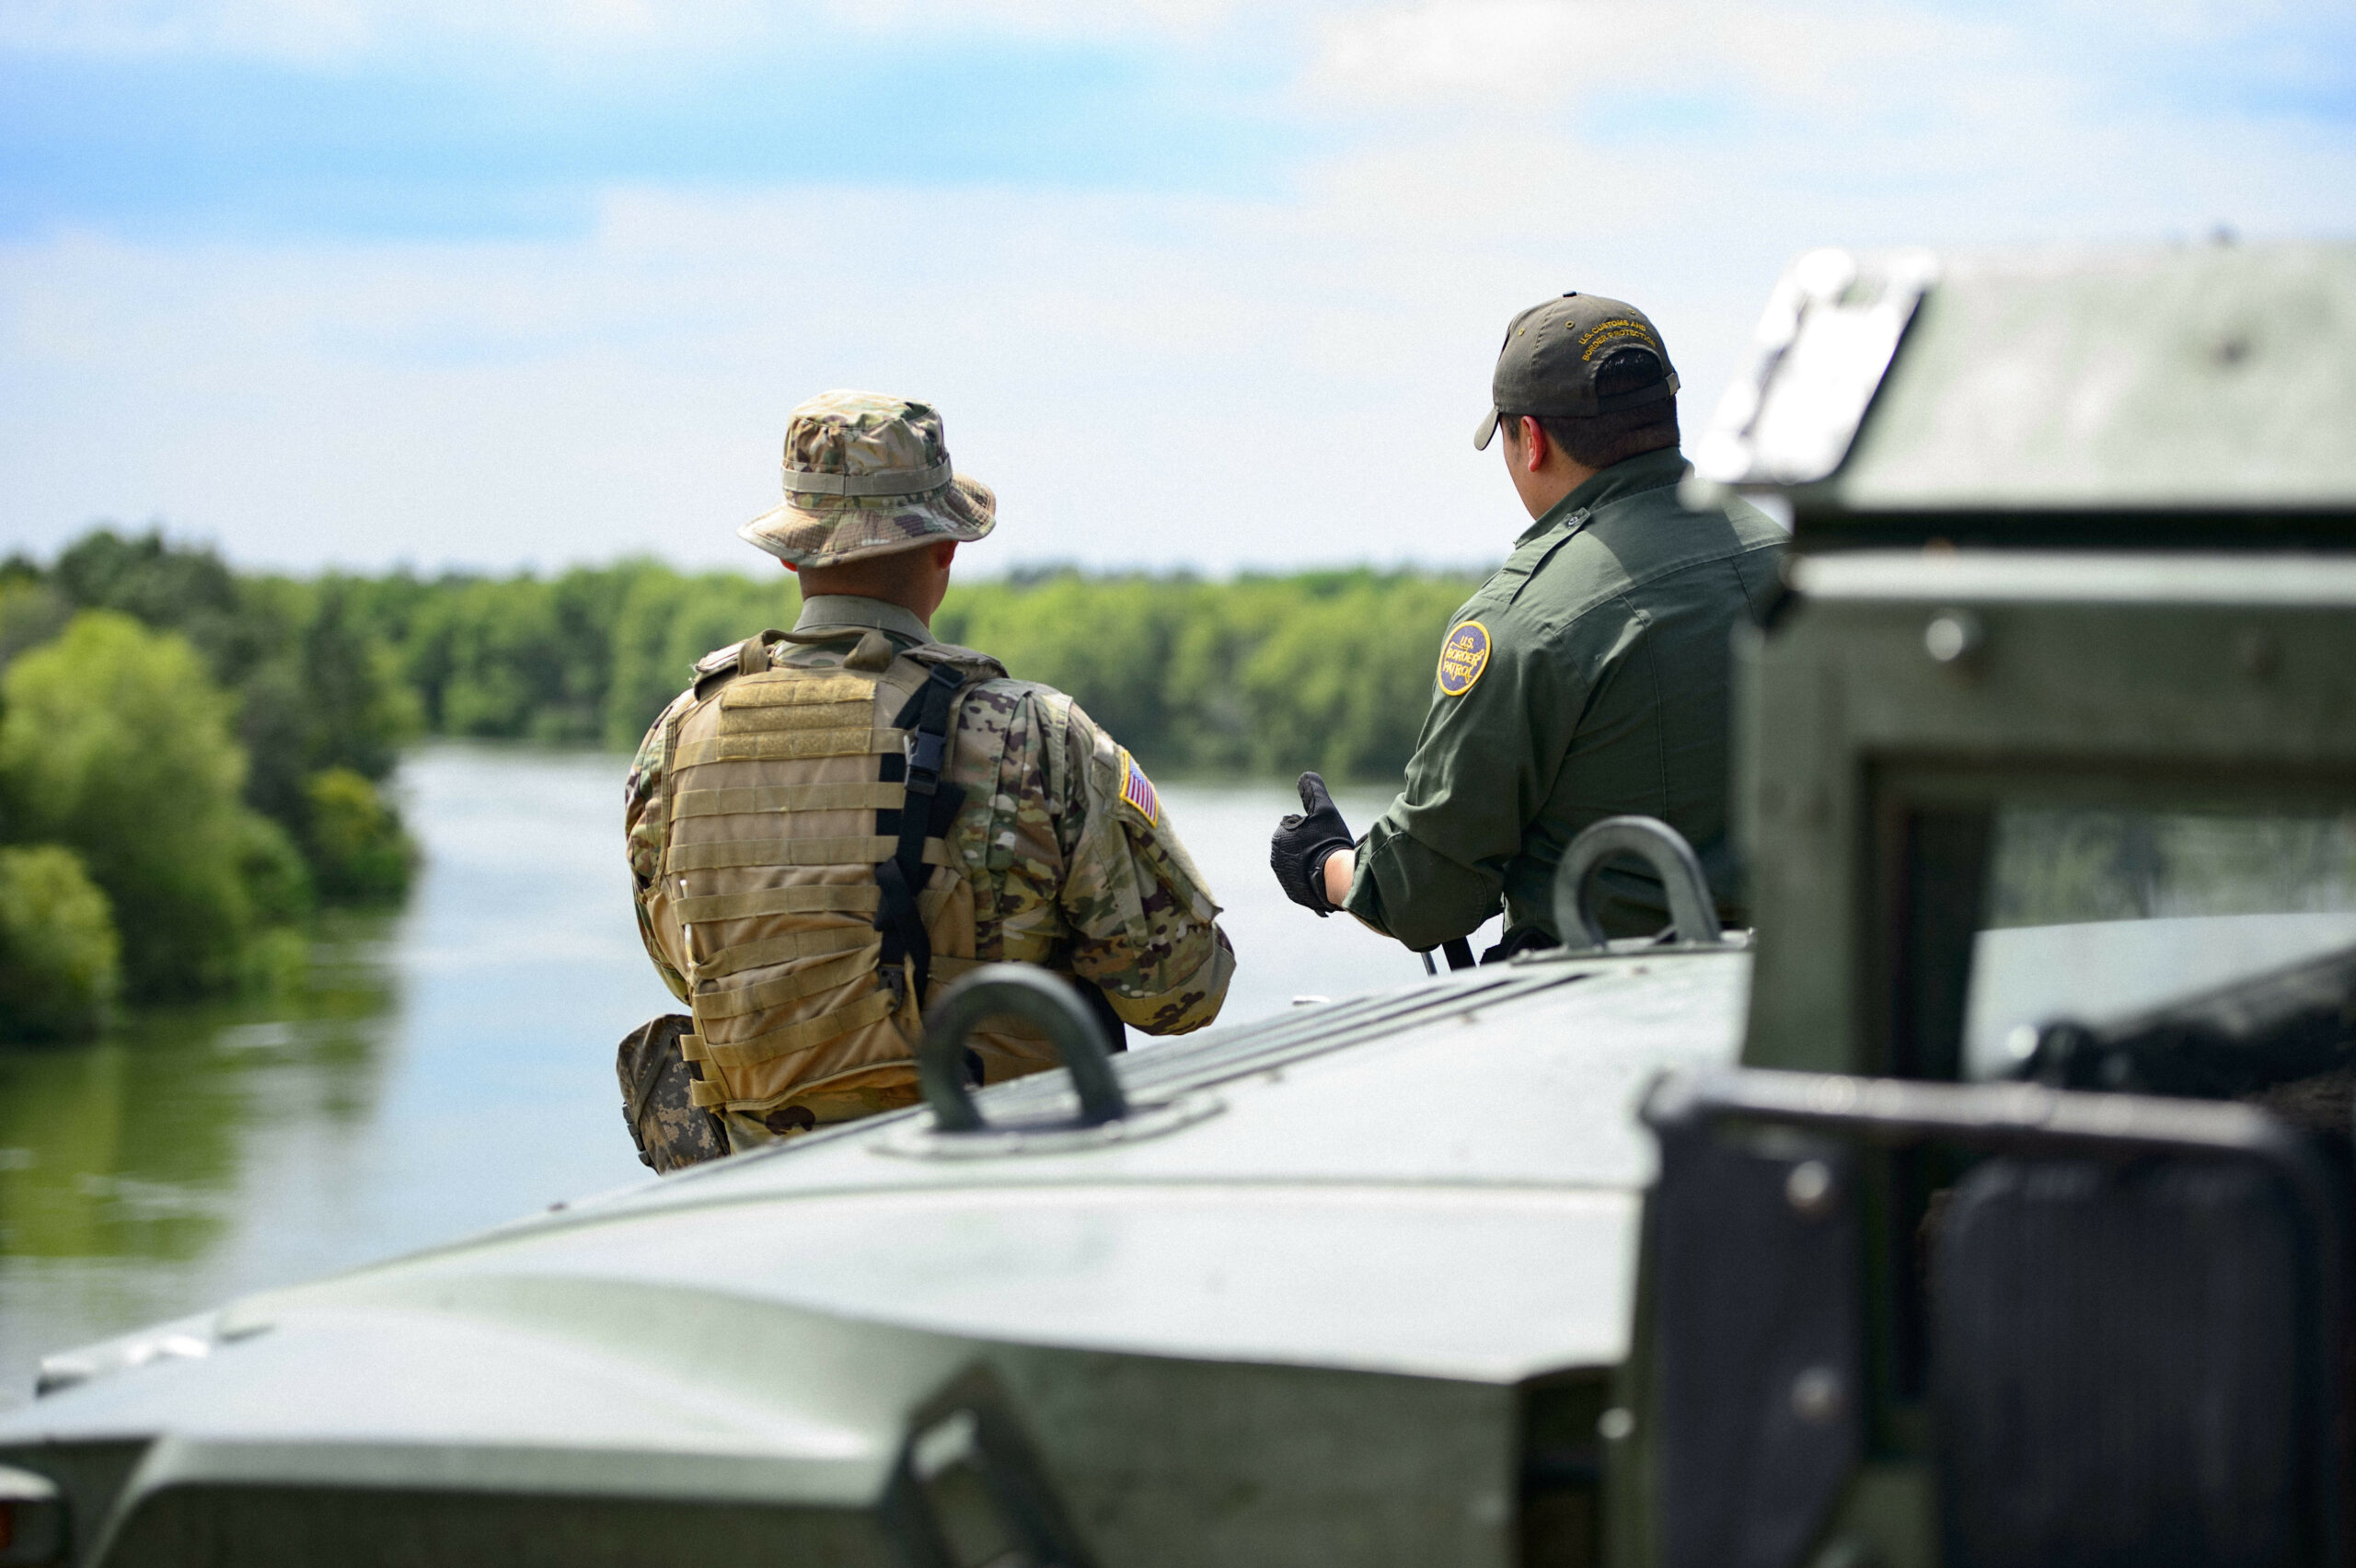 A Texas Guardsmen and a Customs and Border Patrol agent discuss the lay of the land on the shores of the Rio Grande River in Starr County, Texas.